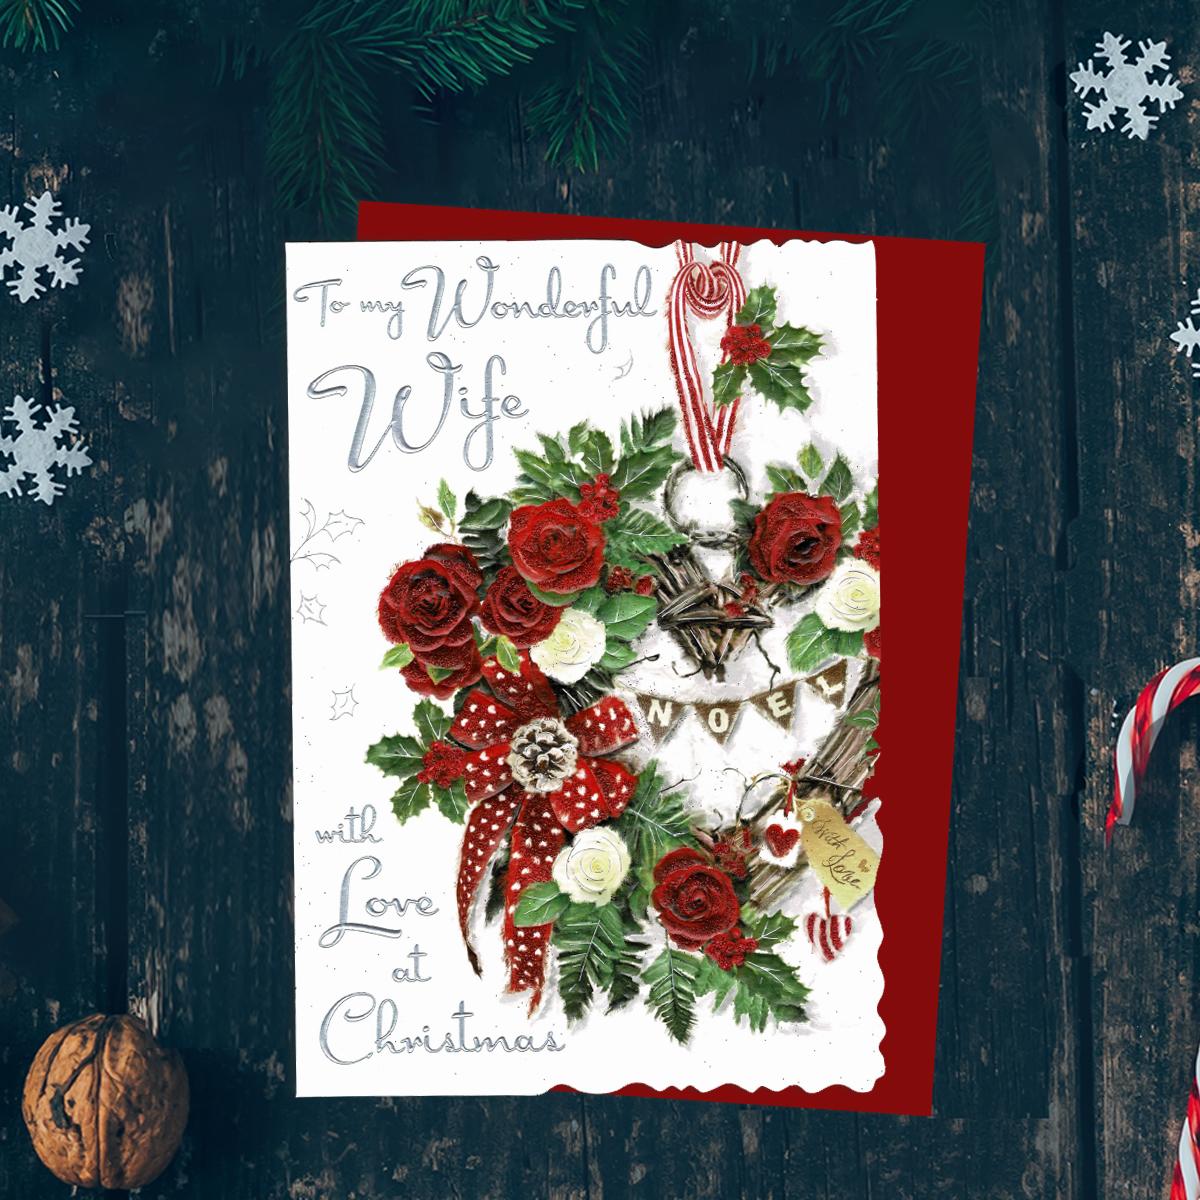 To My Wonderful Wife With Love At Christmas Features A Wicker Heart Of Roses, Ribbons And Cones. Finished With Silver Foil Lettering, Red Glitter And Red Envelope